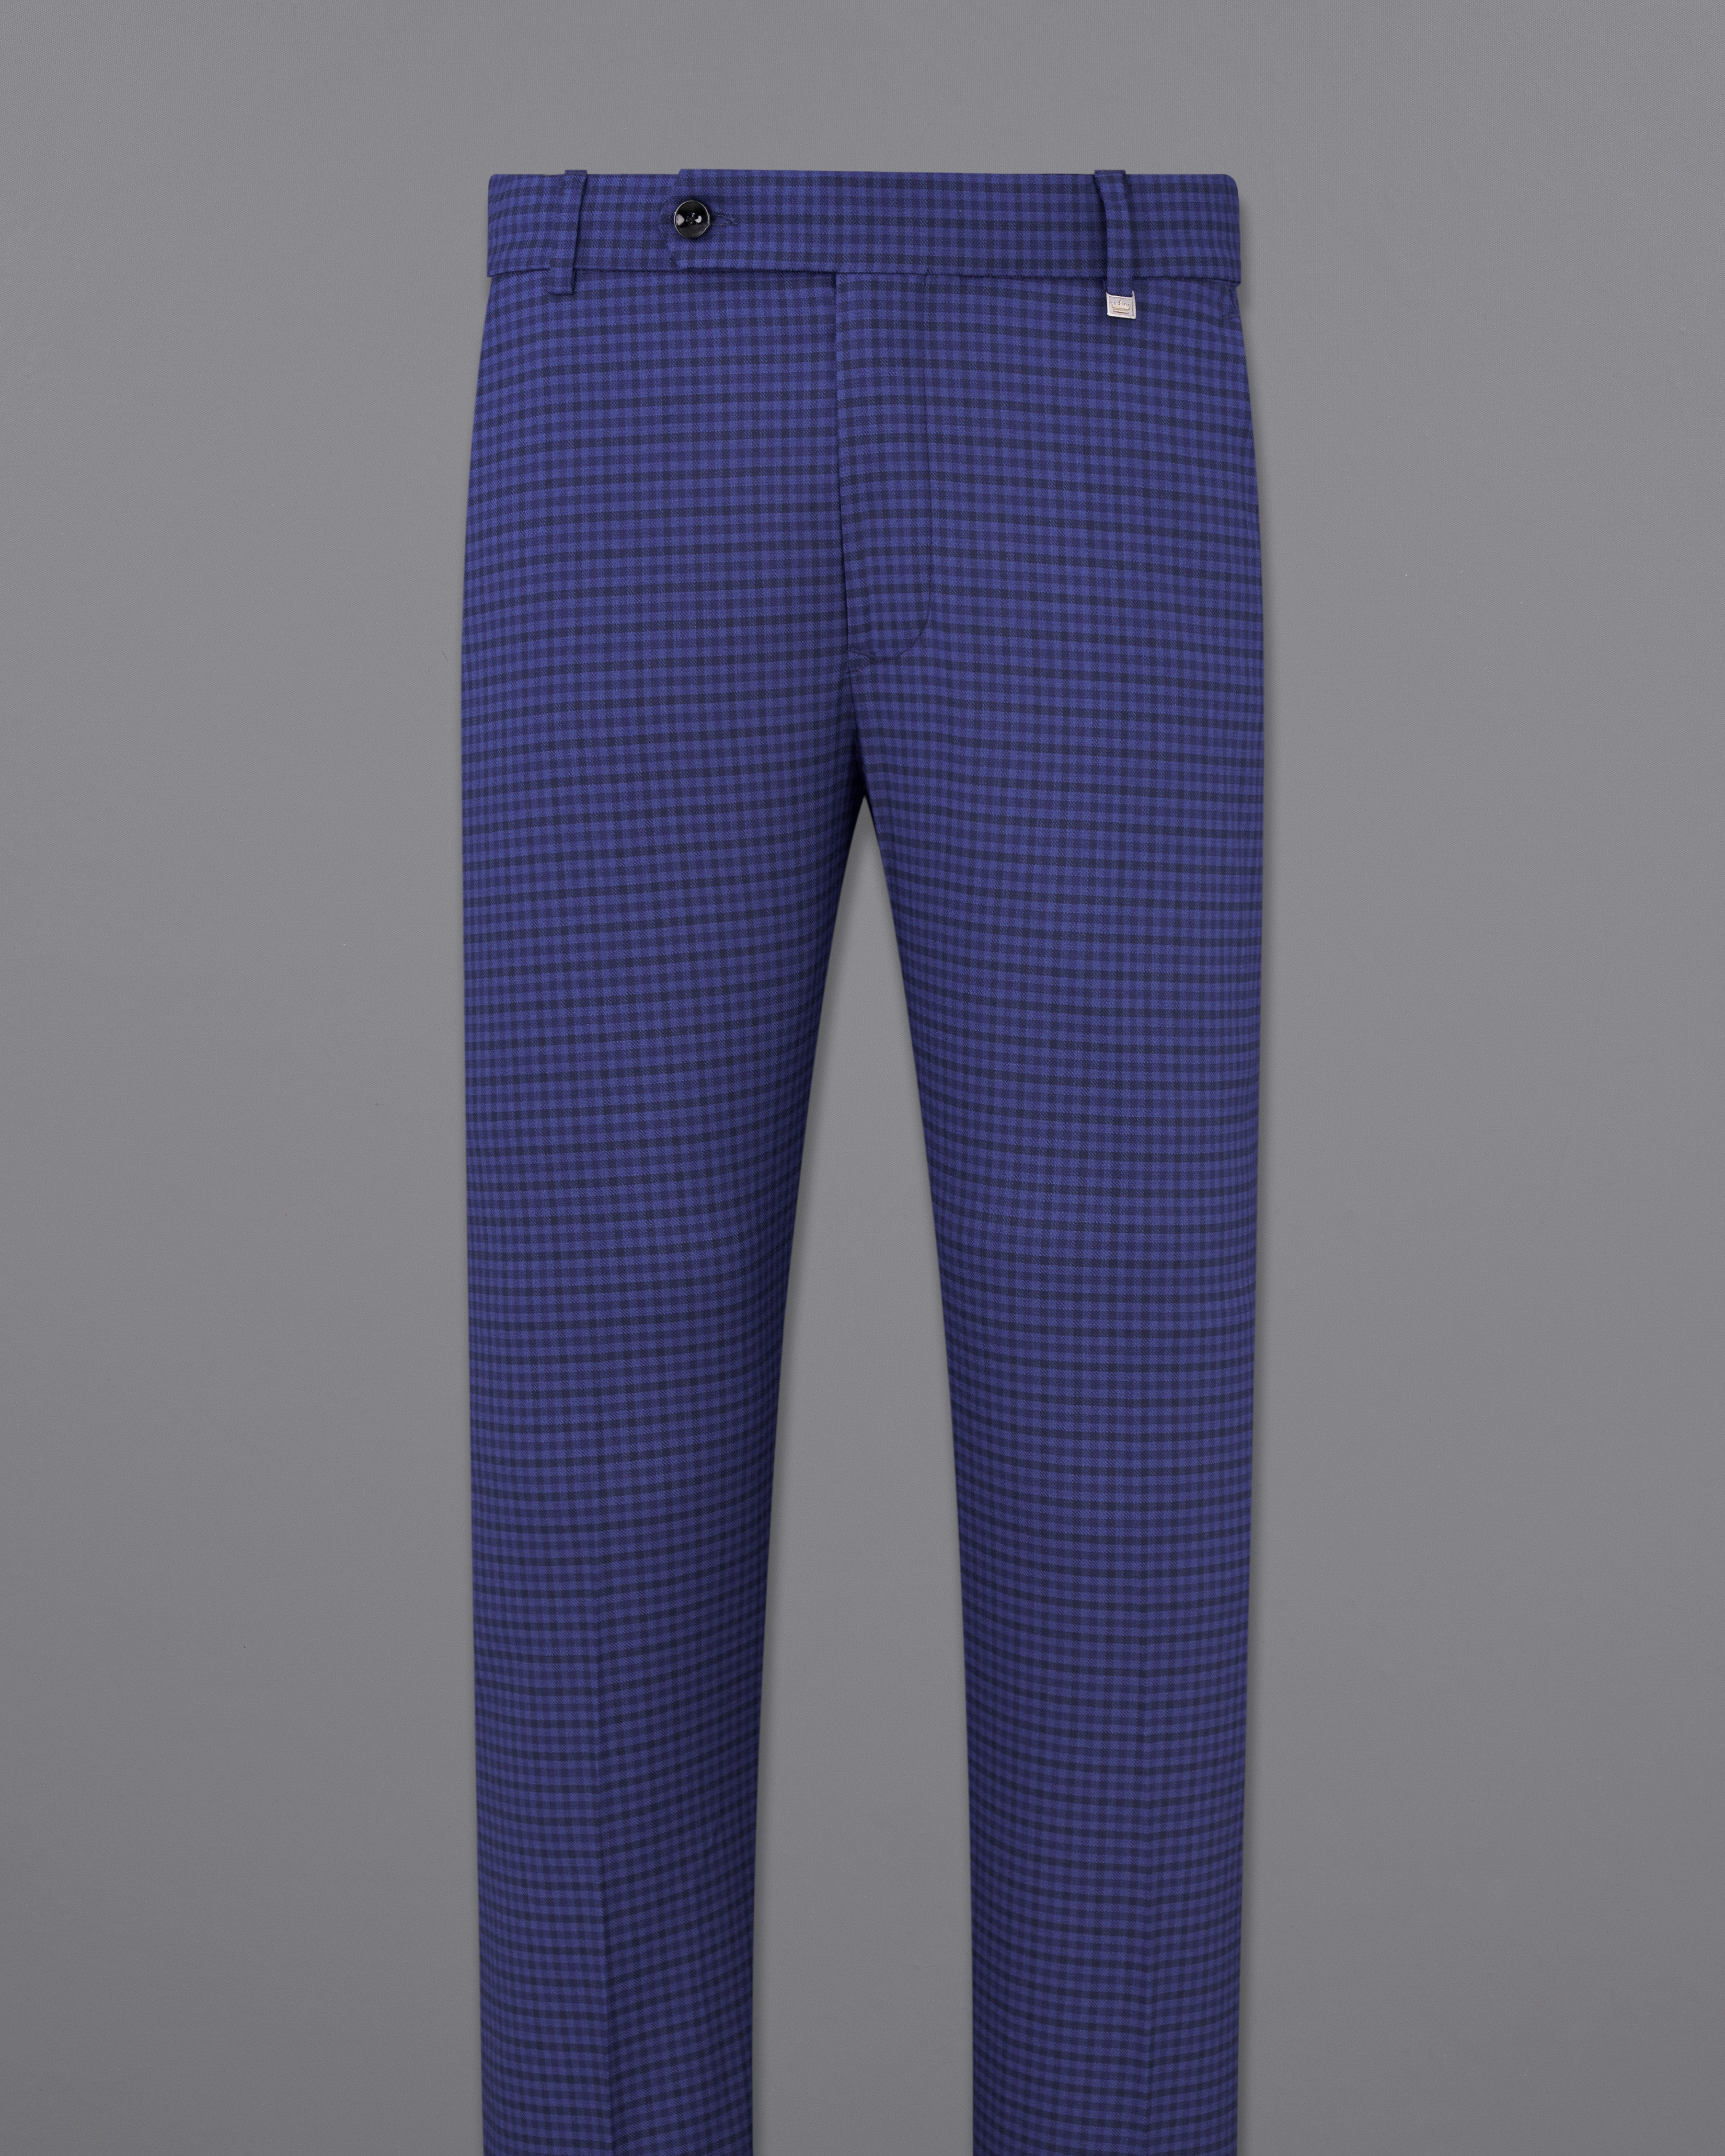 Victoria Blue Gingham Checkered Pants T2494-28, T2494-30, T2494-32, T2494-34, T2494-36, T2494-38, T2494-40, T2494-42, T2494-44